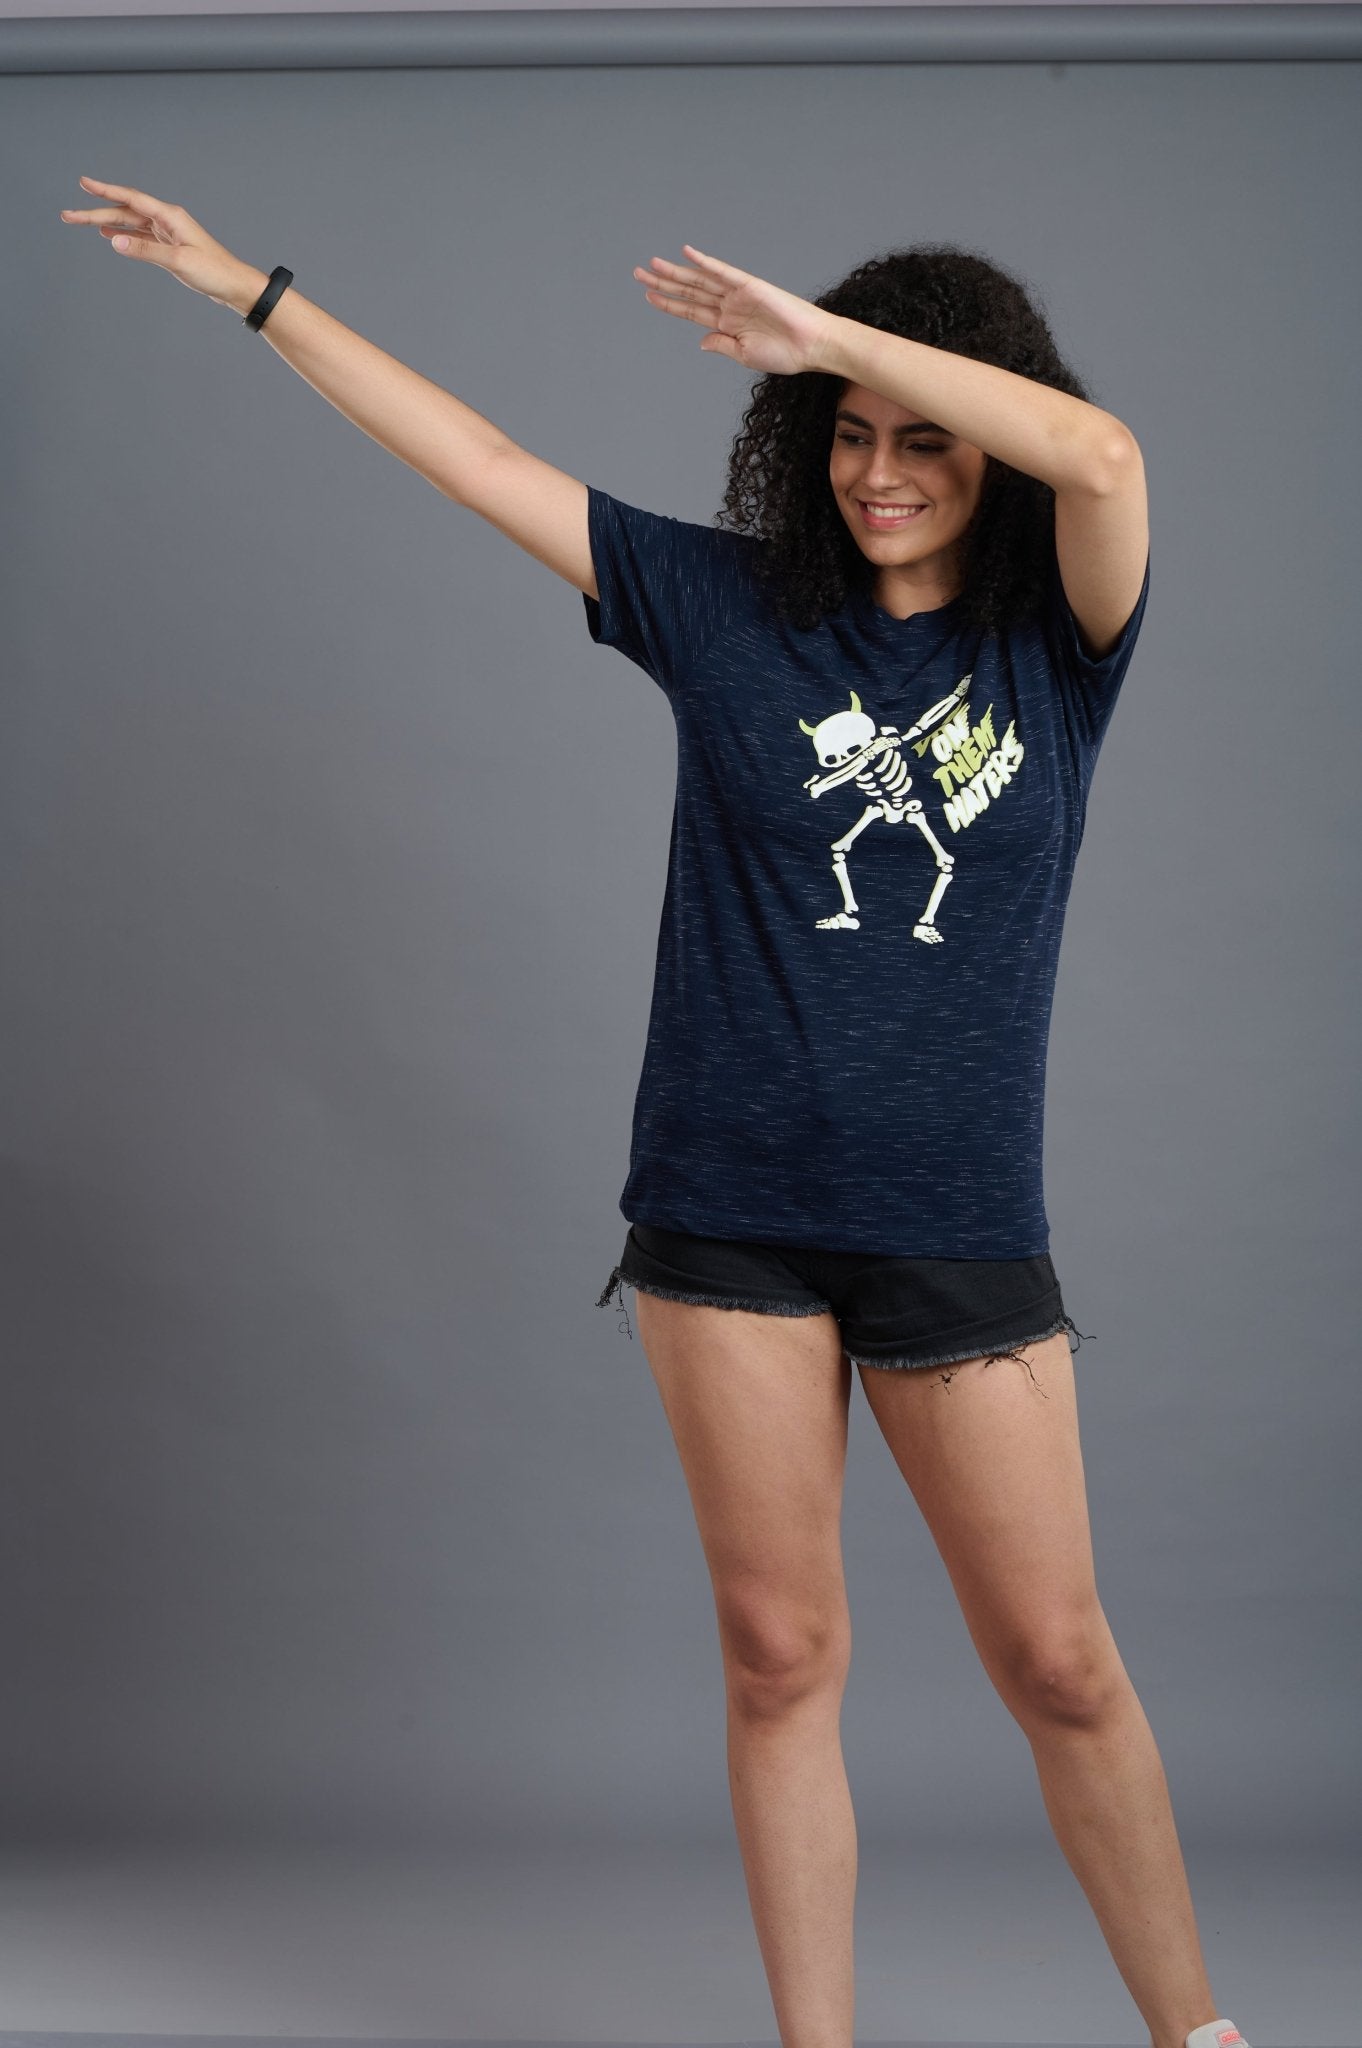 Dab On Them Haters with Skeleton Printed Oversized T-Shirt for Women - Go Devil